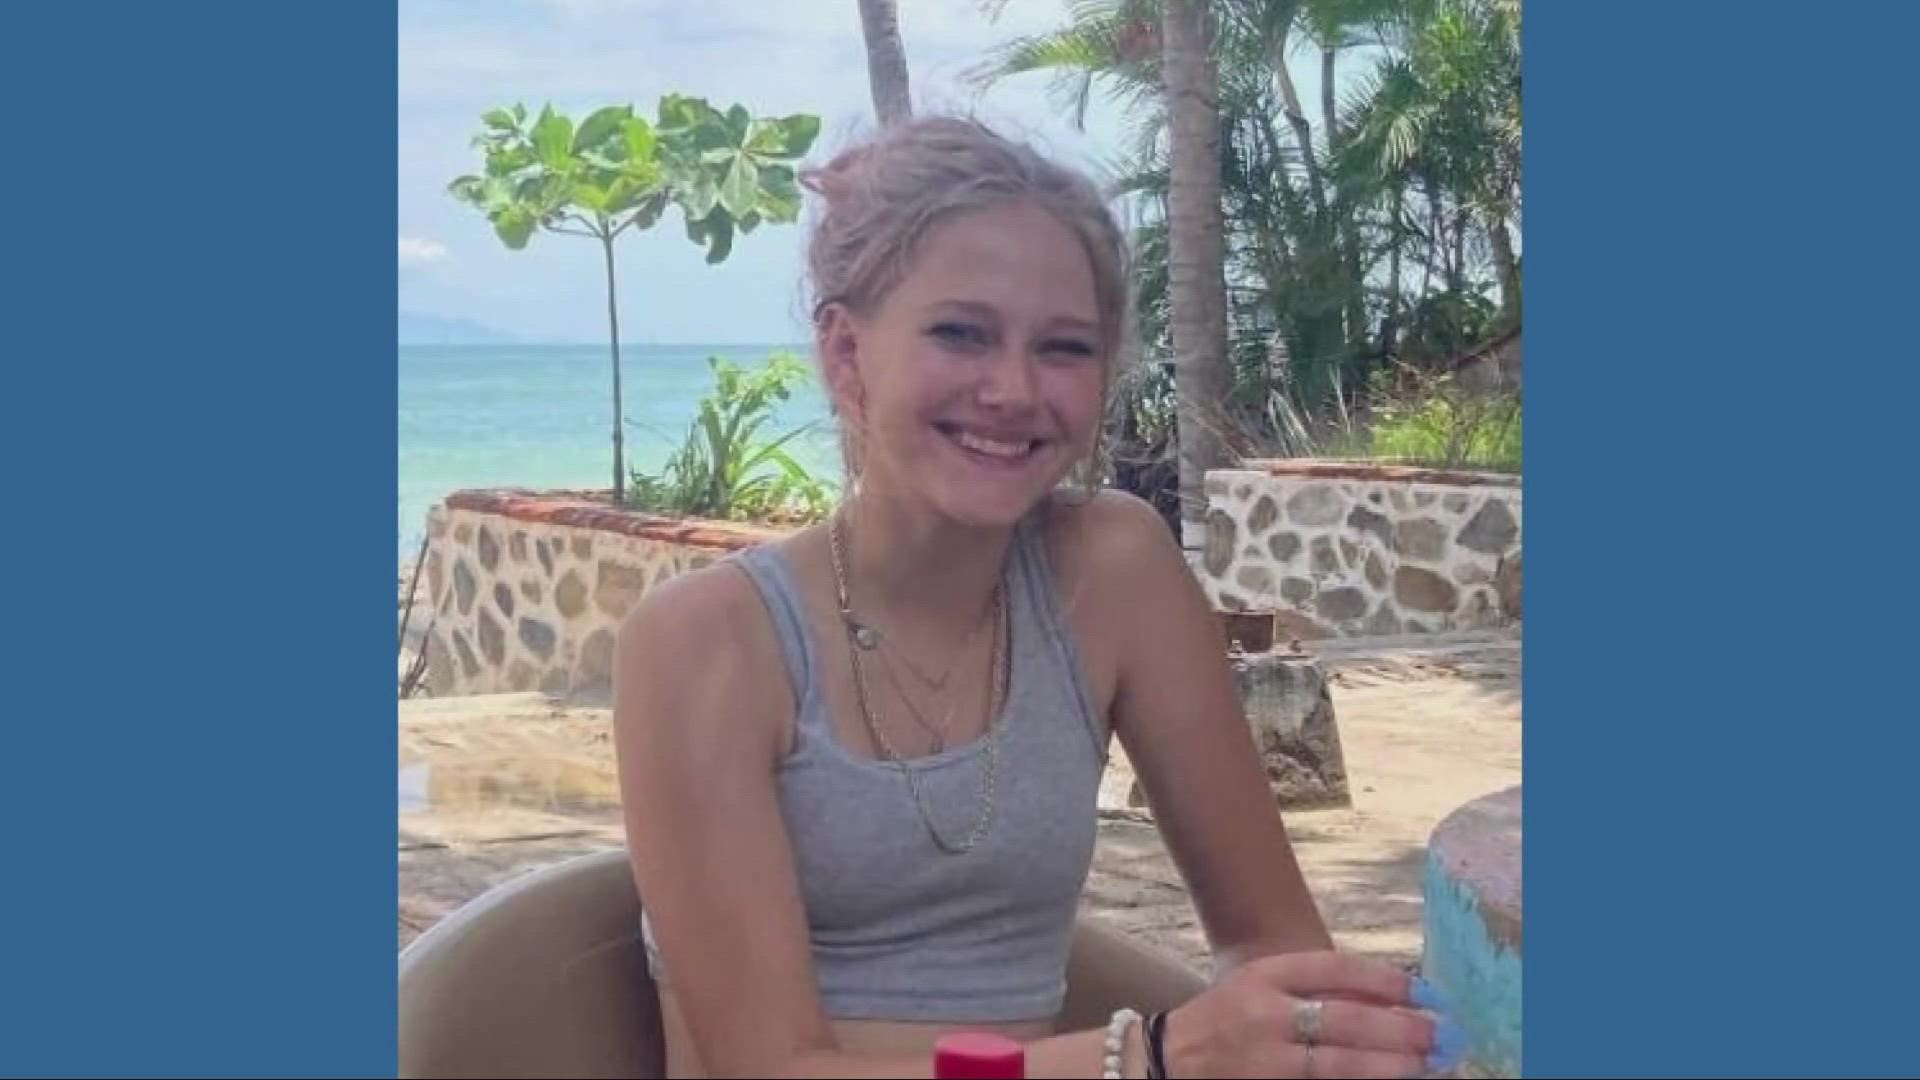 Law enforcement has not confirmed that the body is Kiely Rodni, and a family representative says they have nothing to share until they hear from deputies.